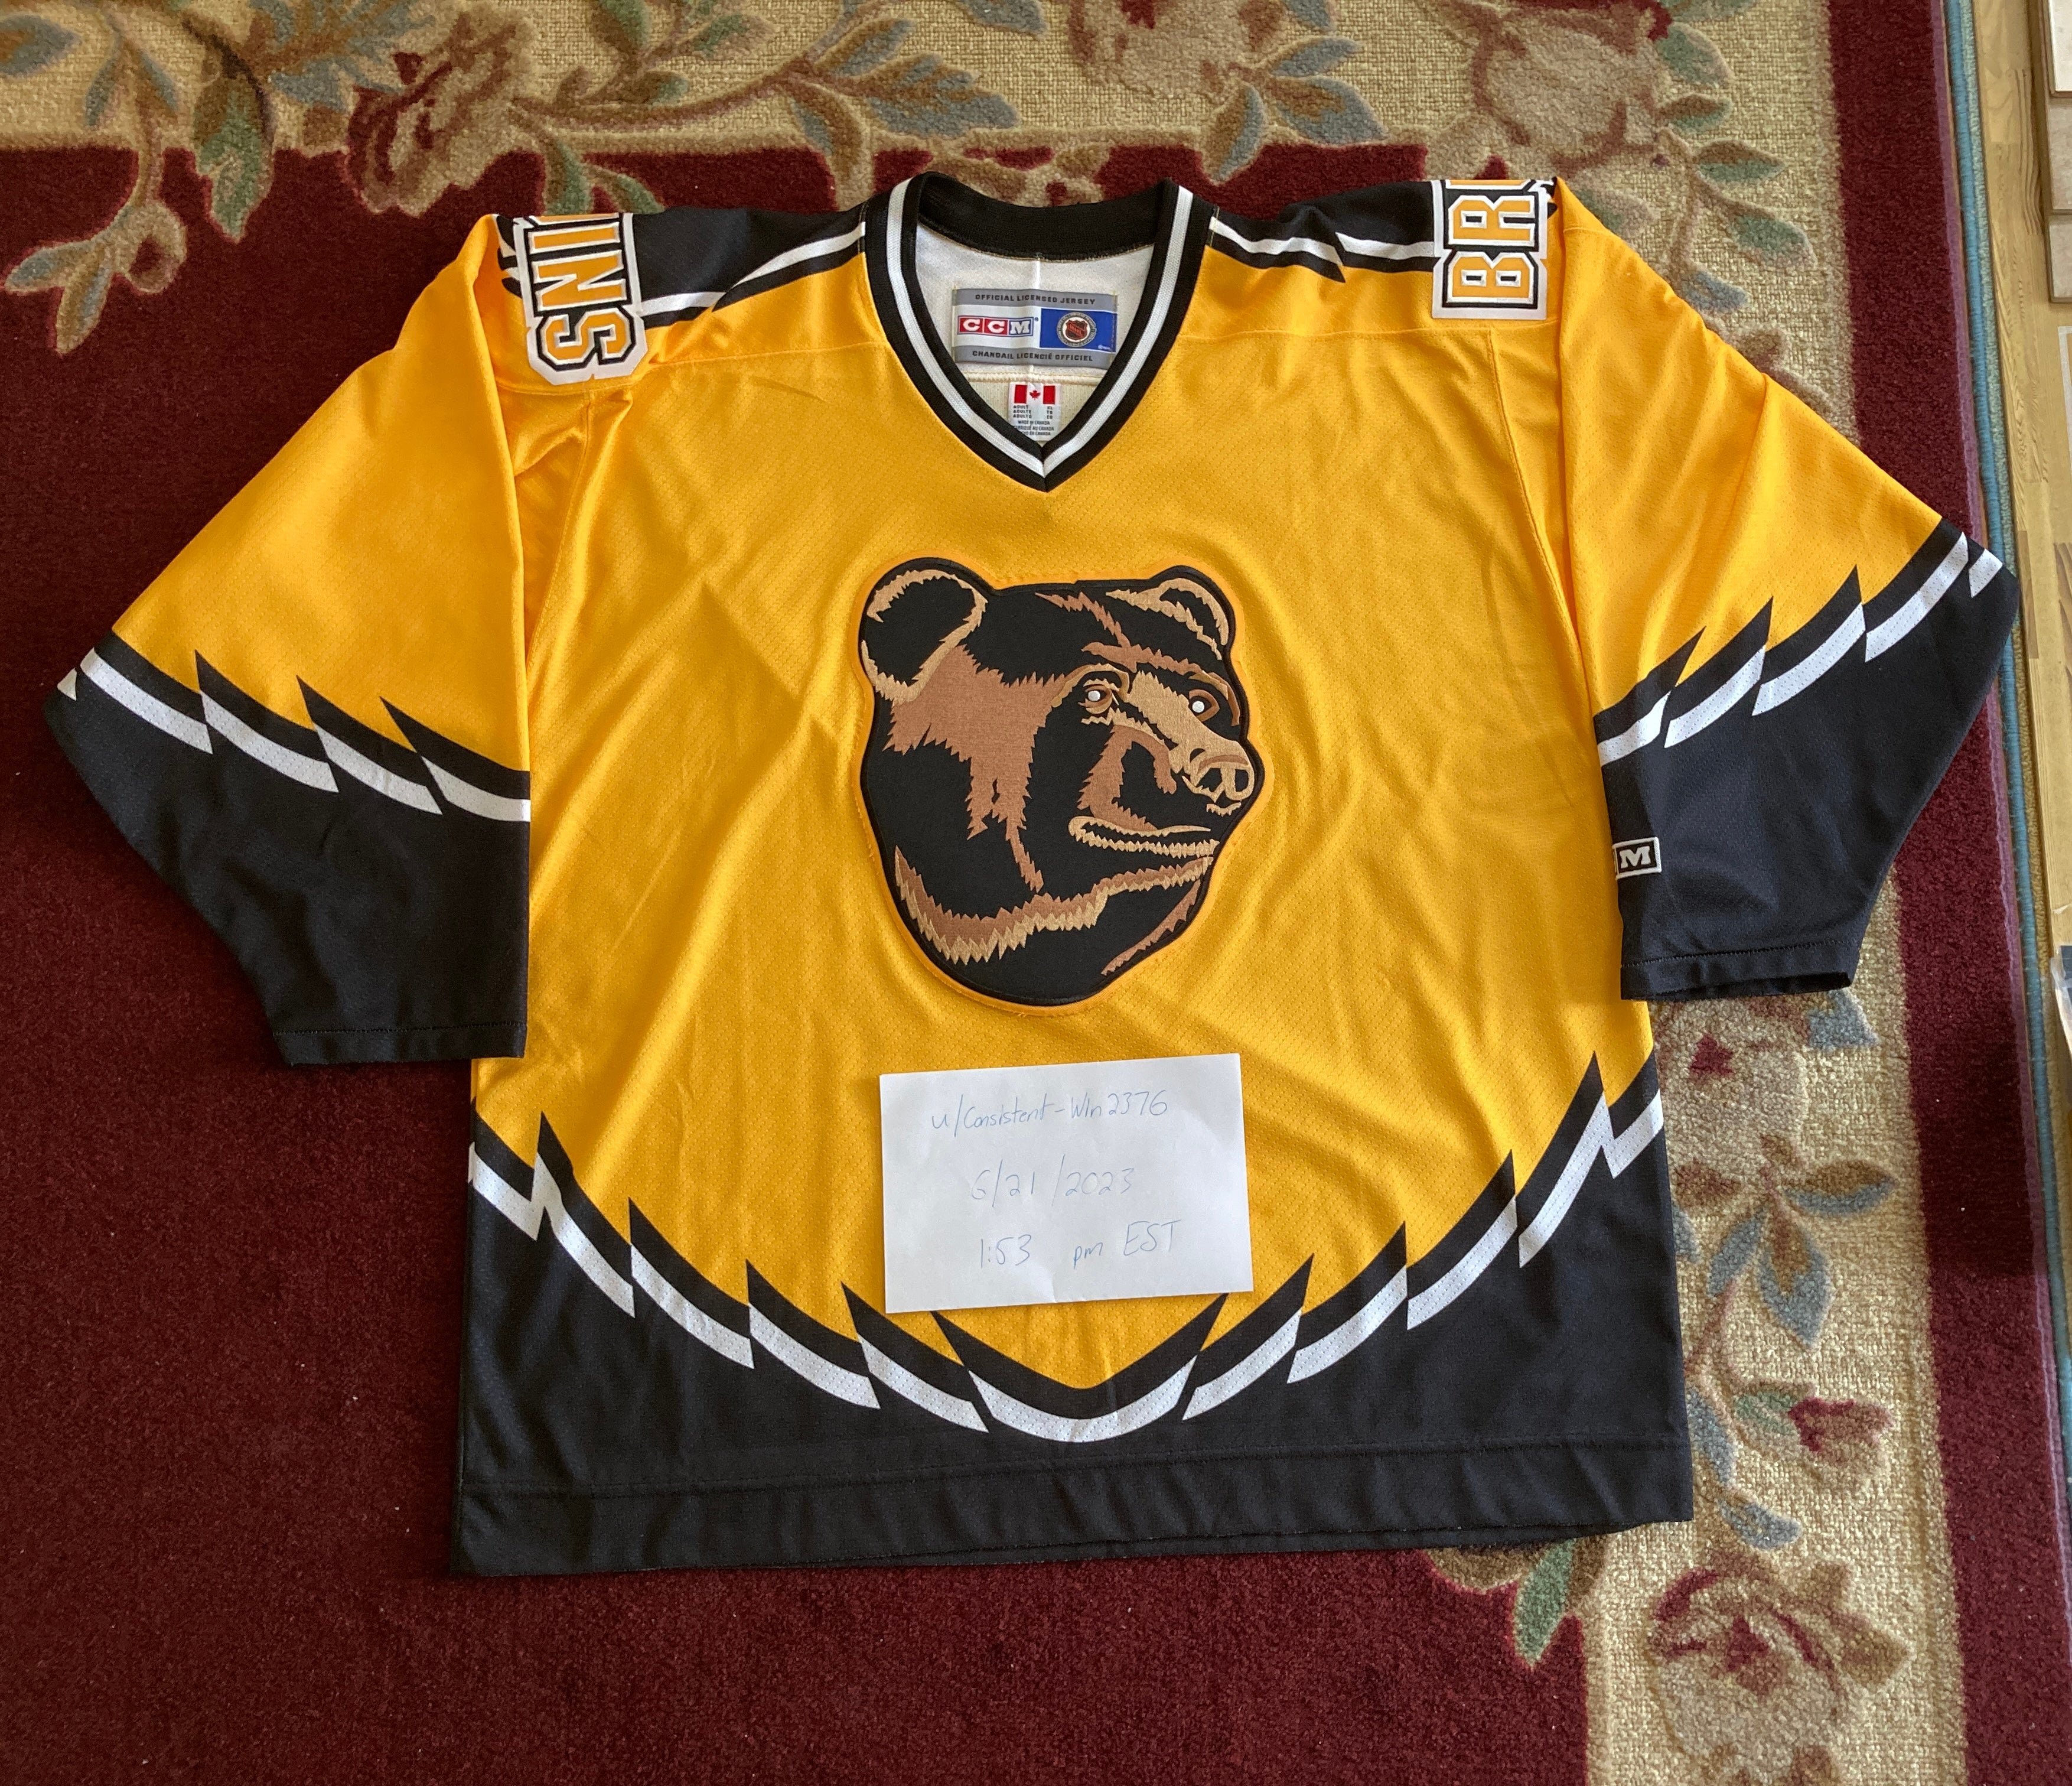 VINTAGE MADE IN CANADA BOSTON BRUINS THE POOH BEAR YOUTH HOCKEY JERSEY SIZE  L/XL